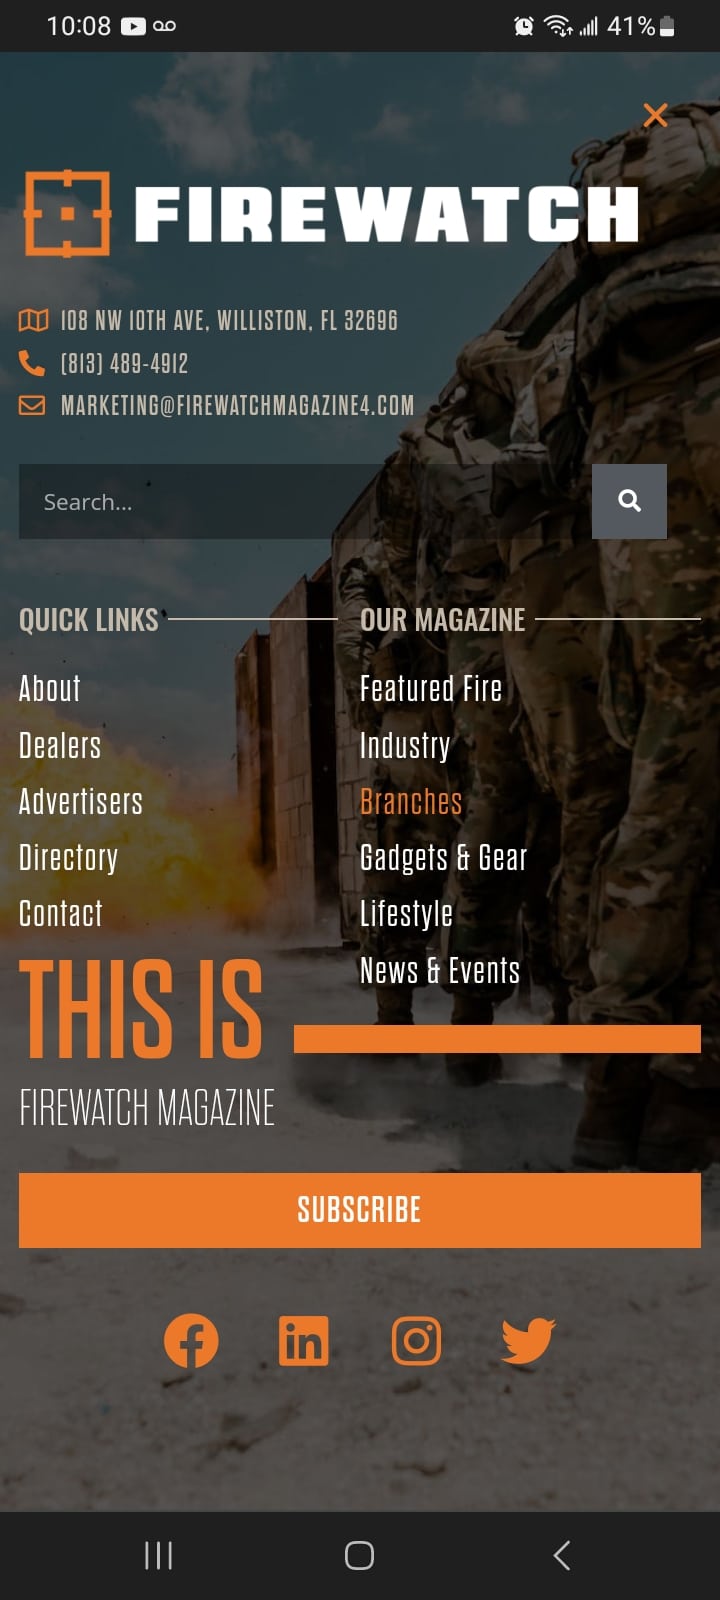 The mobile popout menu for the website of Firewatch magazine